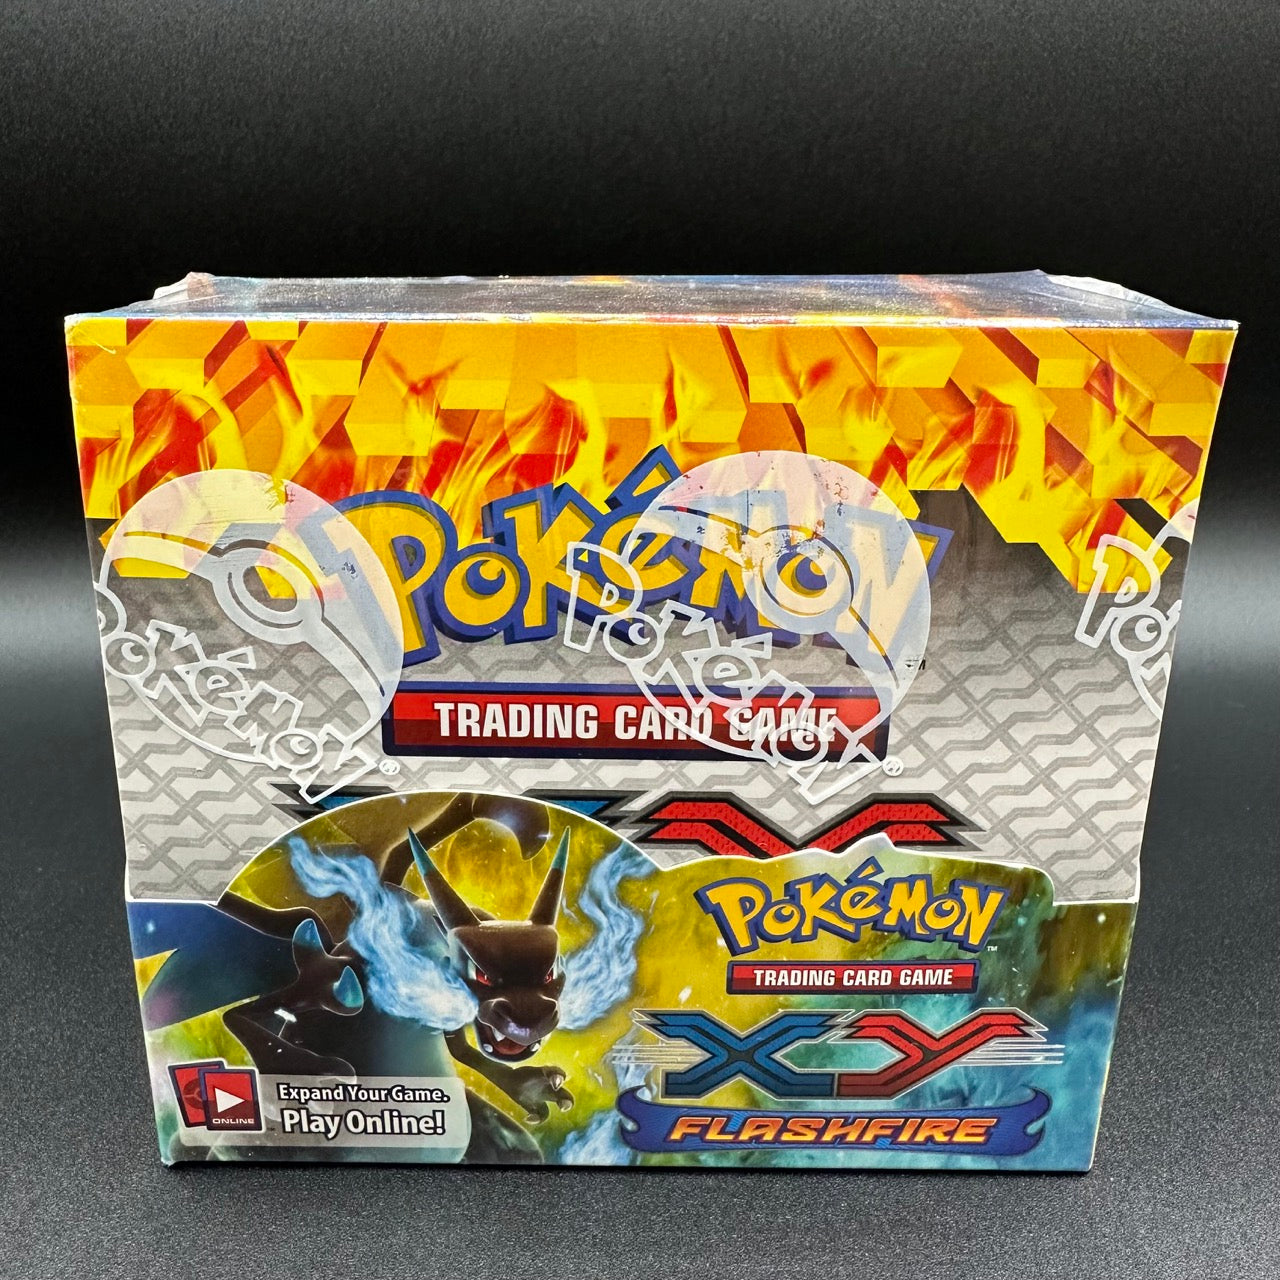 
                  
                    Image of a Pokémon TCG: XY—Flashfire Booster Box with fiery-themed illustrations, promising an exhilarating gameplay experience with the debut of Mega Charizard-EX.
                  
                